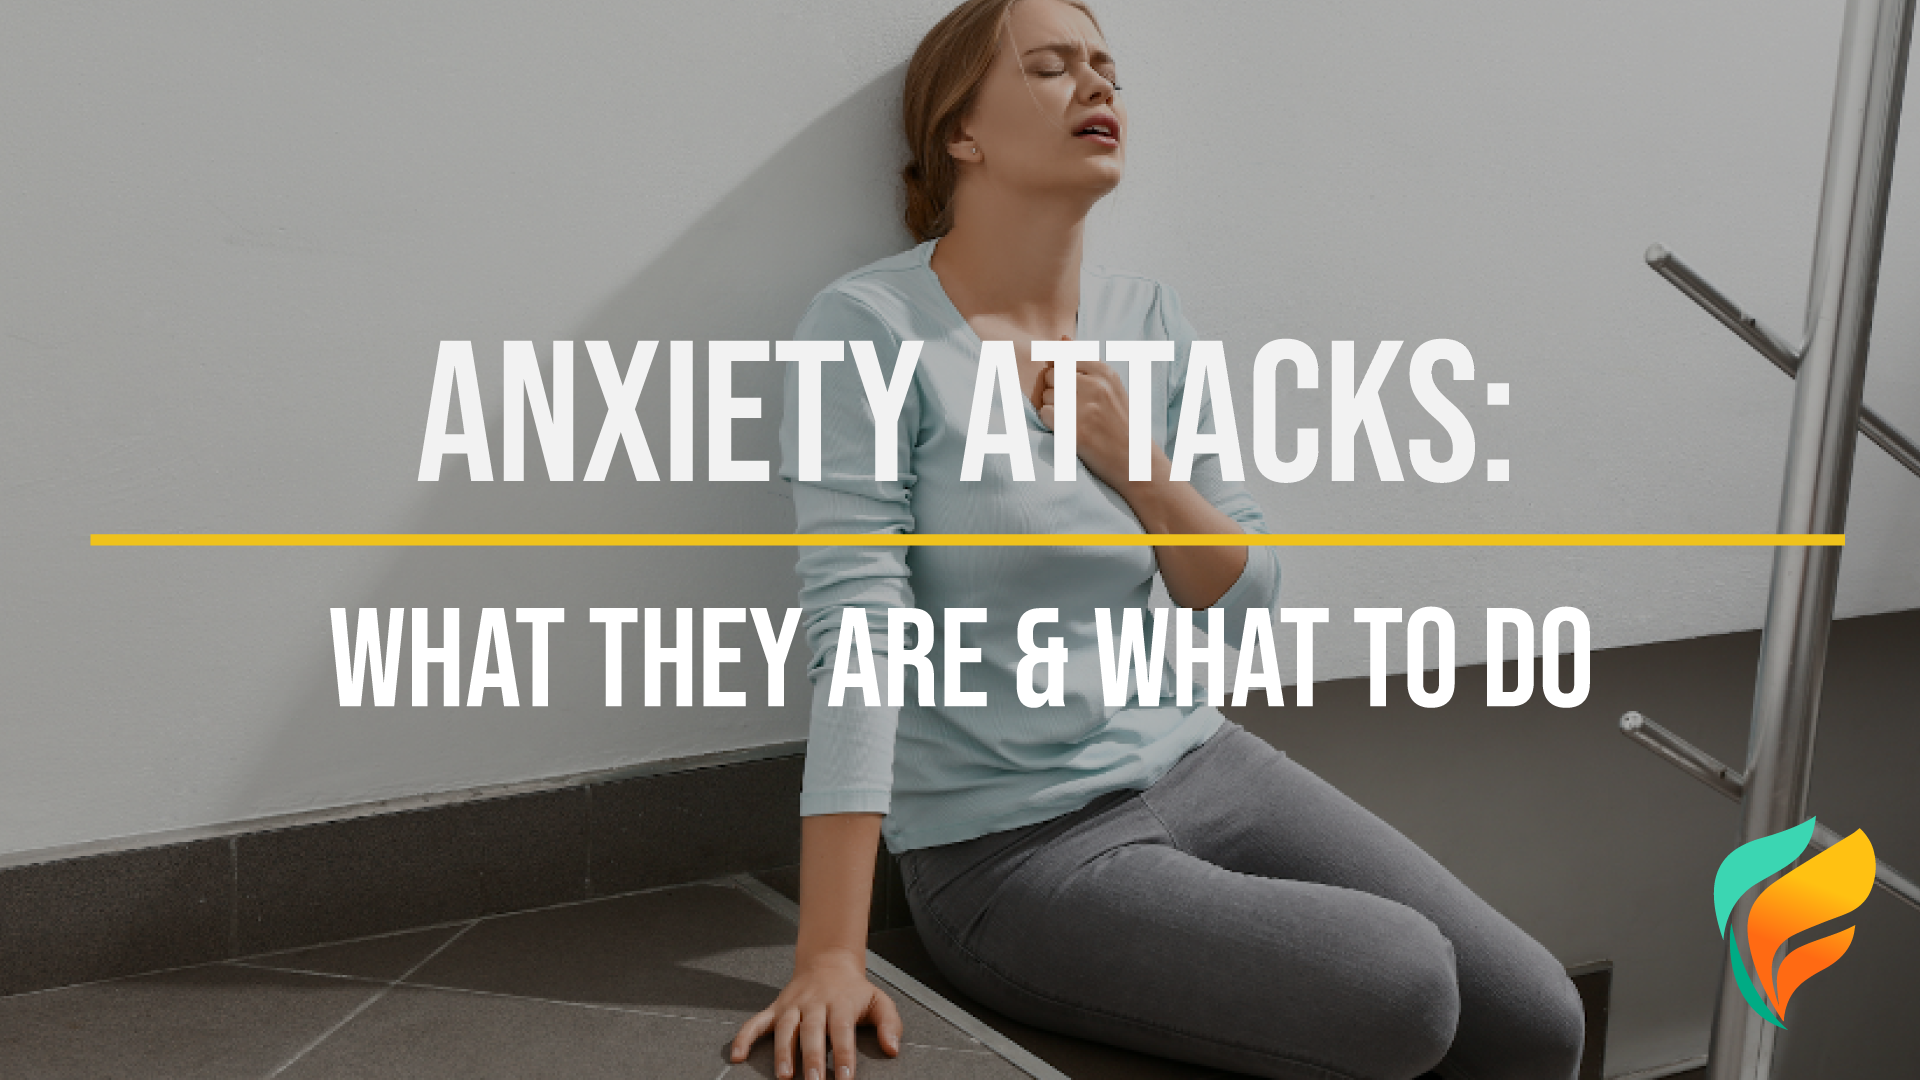 What are anxiety attacks?